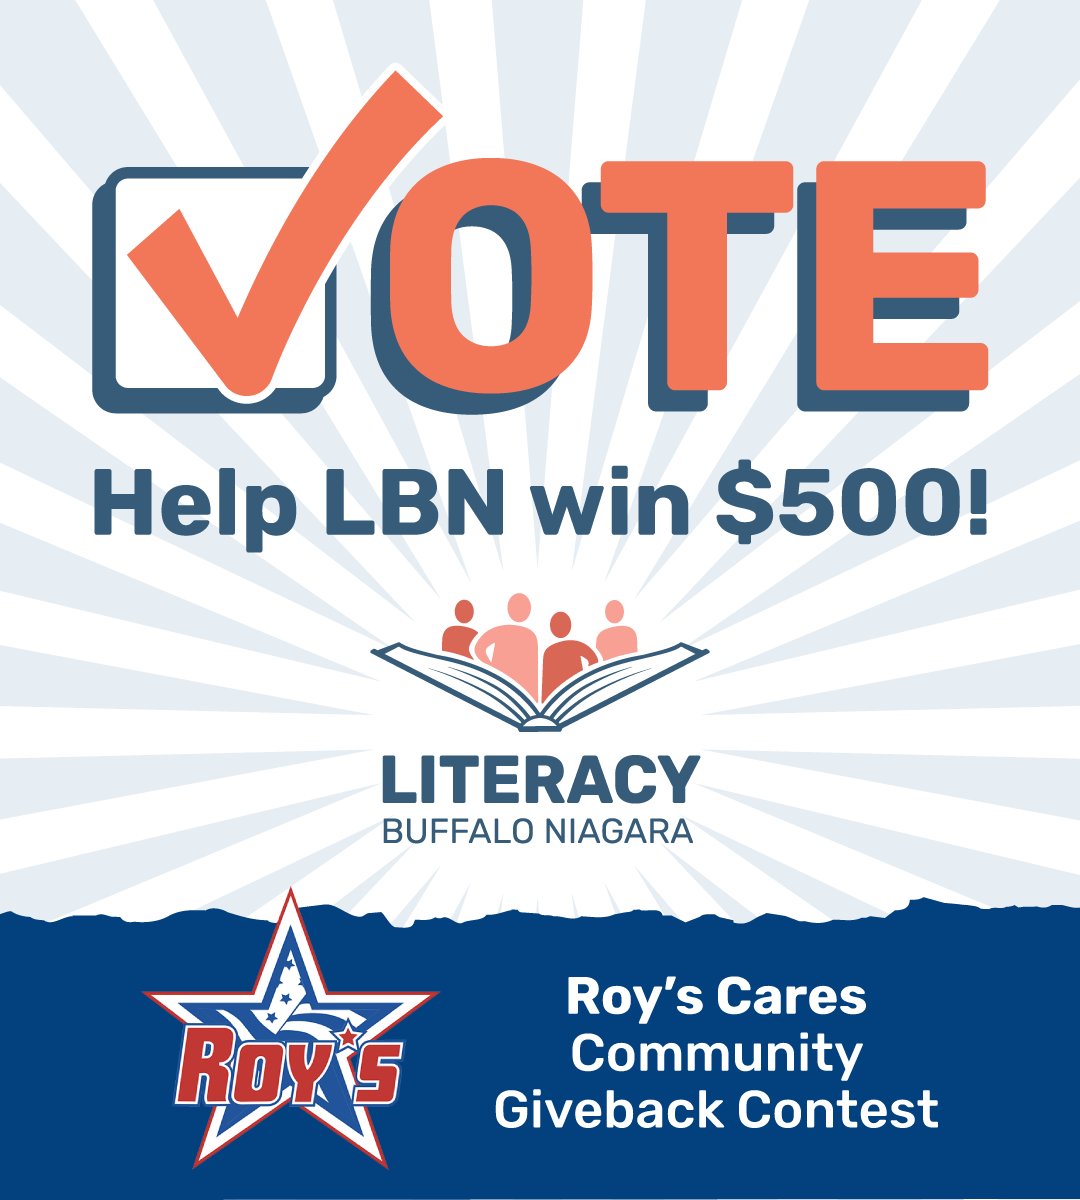 We’re thrilled to be part of the Roy’s Cares Community Giveback Contest! Vote for Literacy Buffalo Niagara every day from April 1st to April 25th and help us win $500. #RoysCares #VoteDaily #LiteracyBuffaloNiagara
bit.ly/4aJuYo1